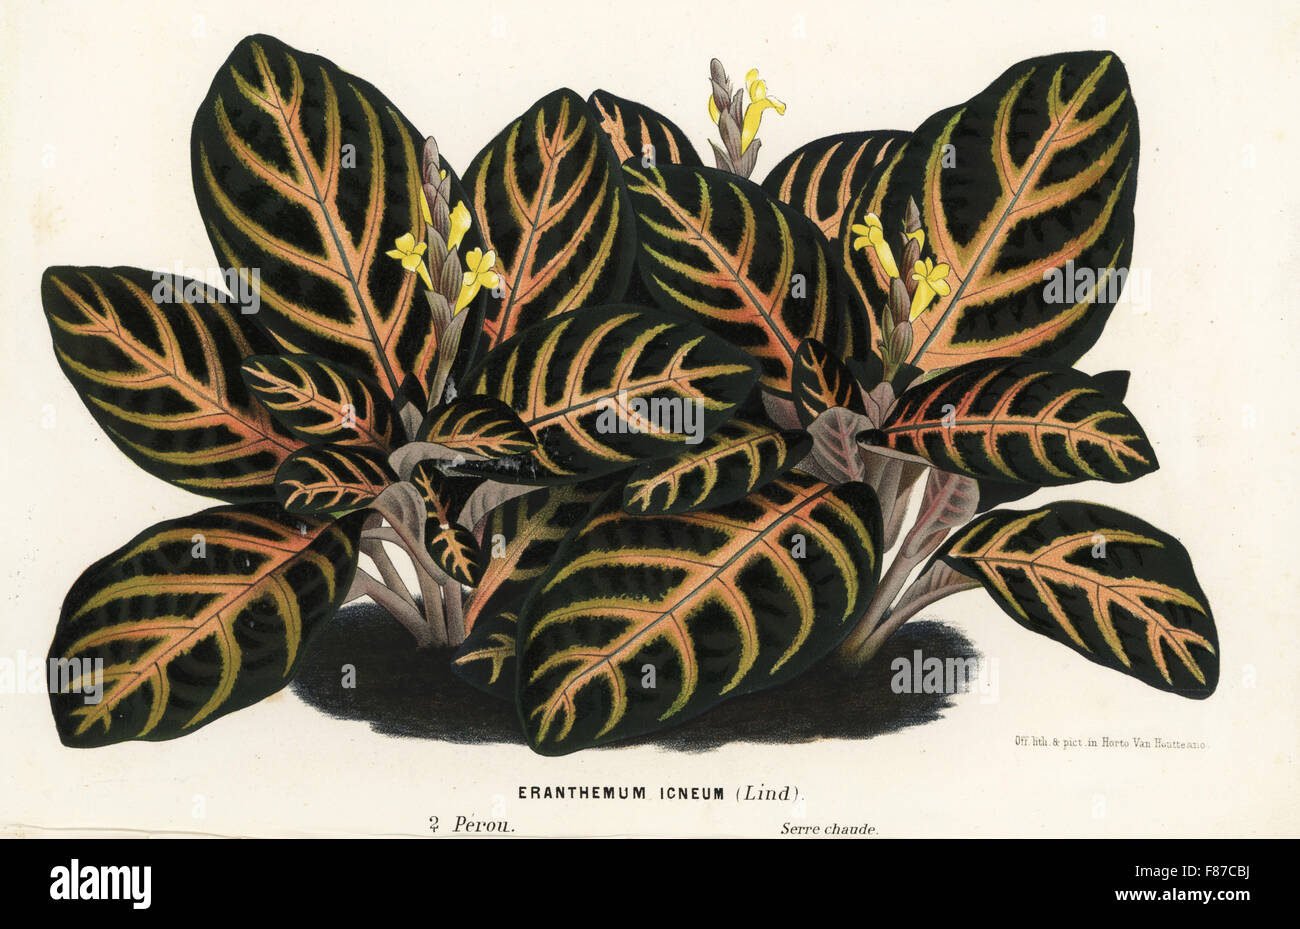 Aphelandra maculata (Eranthemum igneum). Handcoloured lithograph from Louis van Houtte and Charles Lemaire's Flowers of the Gardens and Hothouses of Europe, Flore des Serres et des Jardins de l'Europe, Ghent, Belgium, 1867-1868. Stock Photo